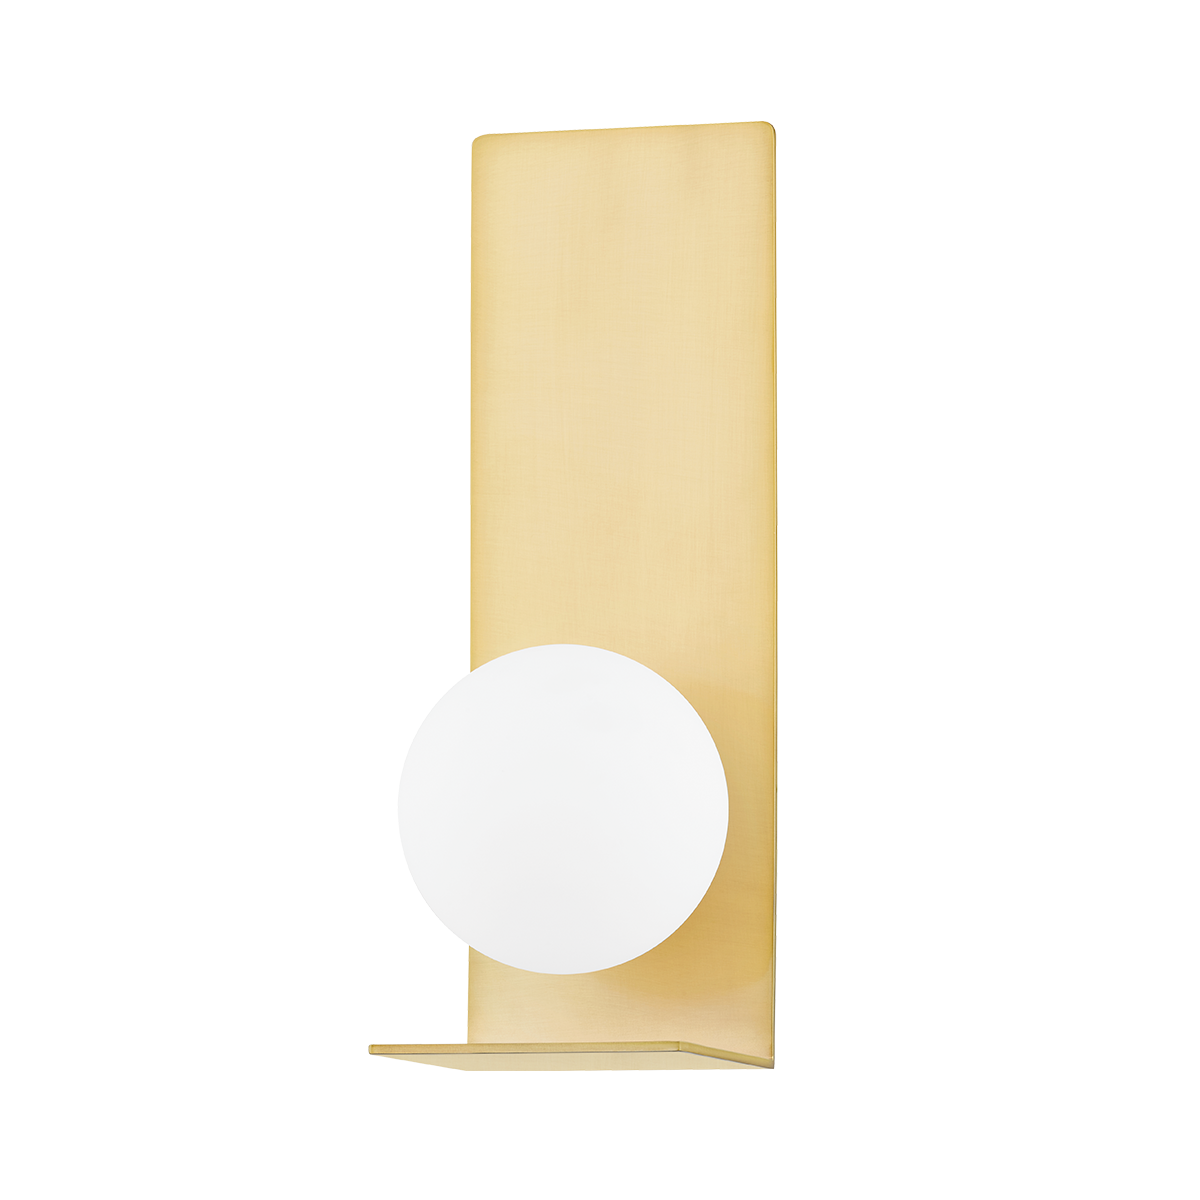 Lani 1 Light Wall Sconce-Mitzi-HVL-H533101-AGB-Outdoor Wall SconcesAged Brass-1-France and Son